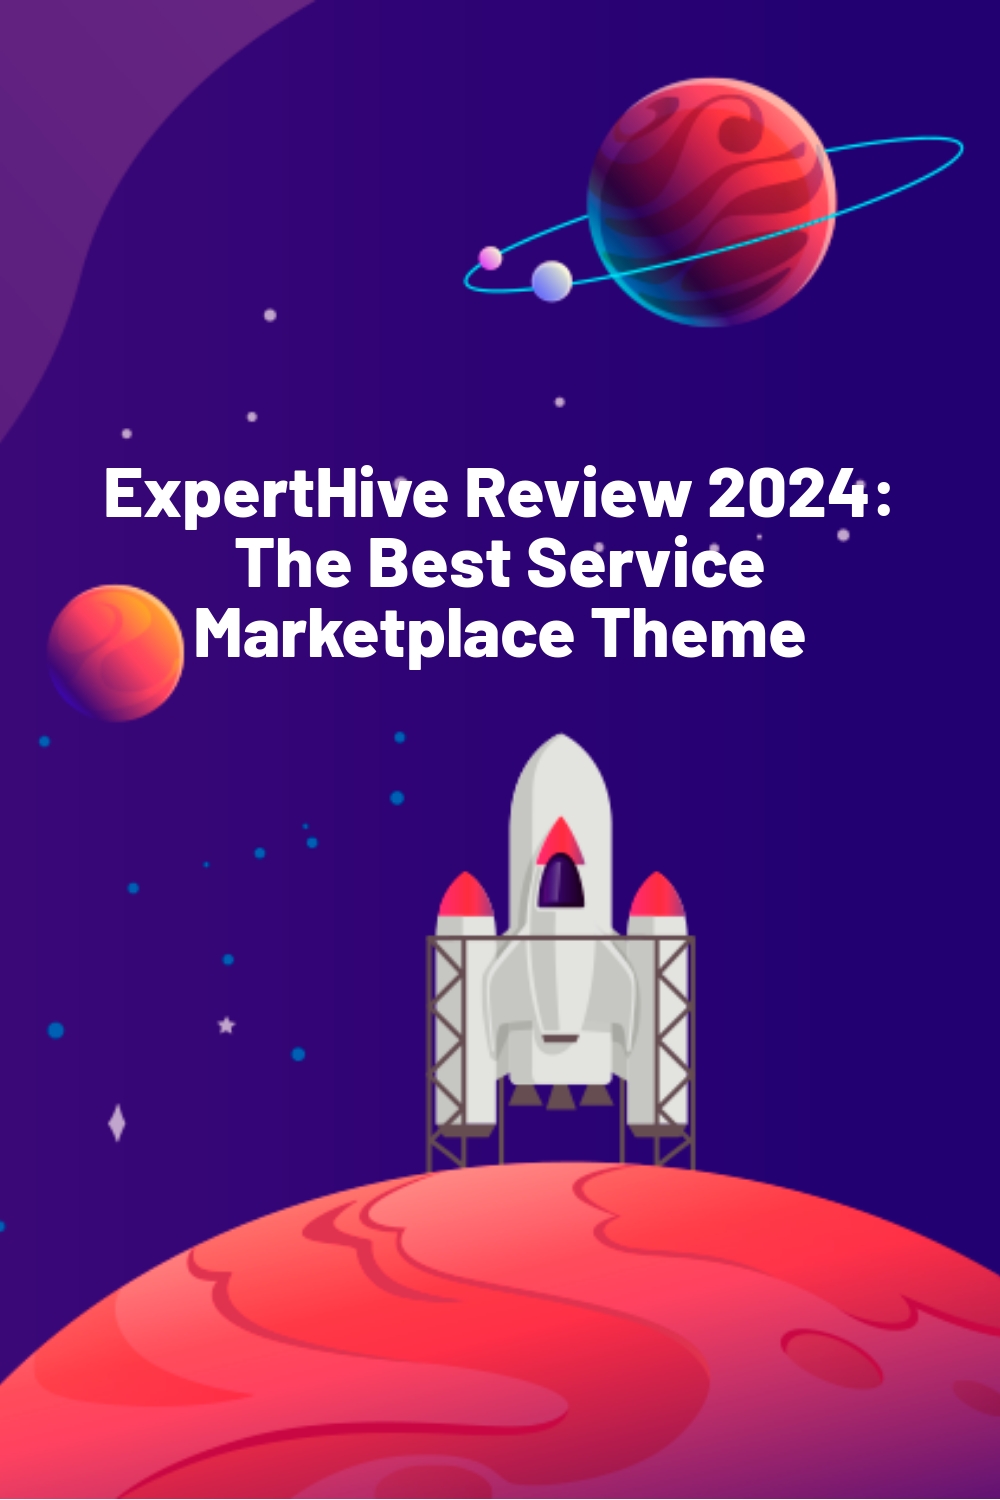 ExpertHive Review 2024: The Best Service Marketplace Theme